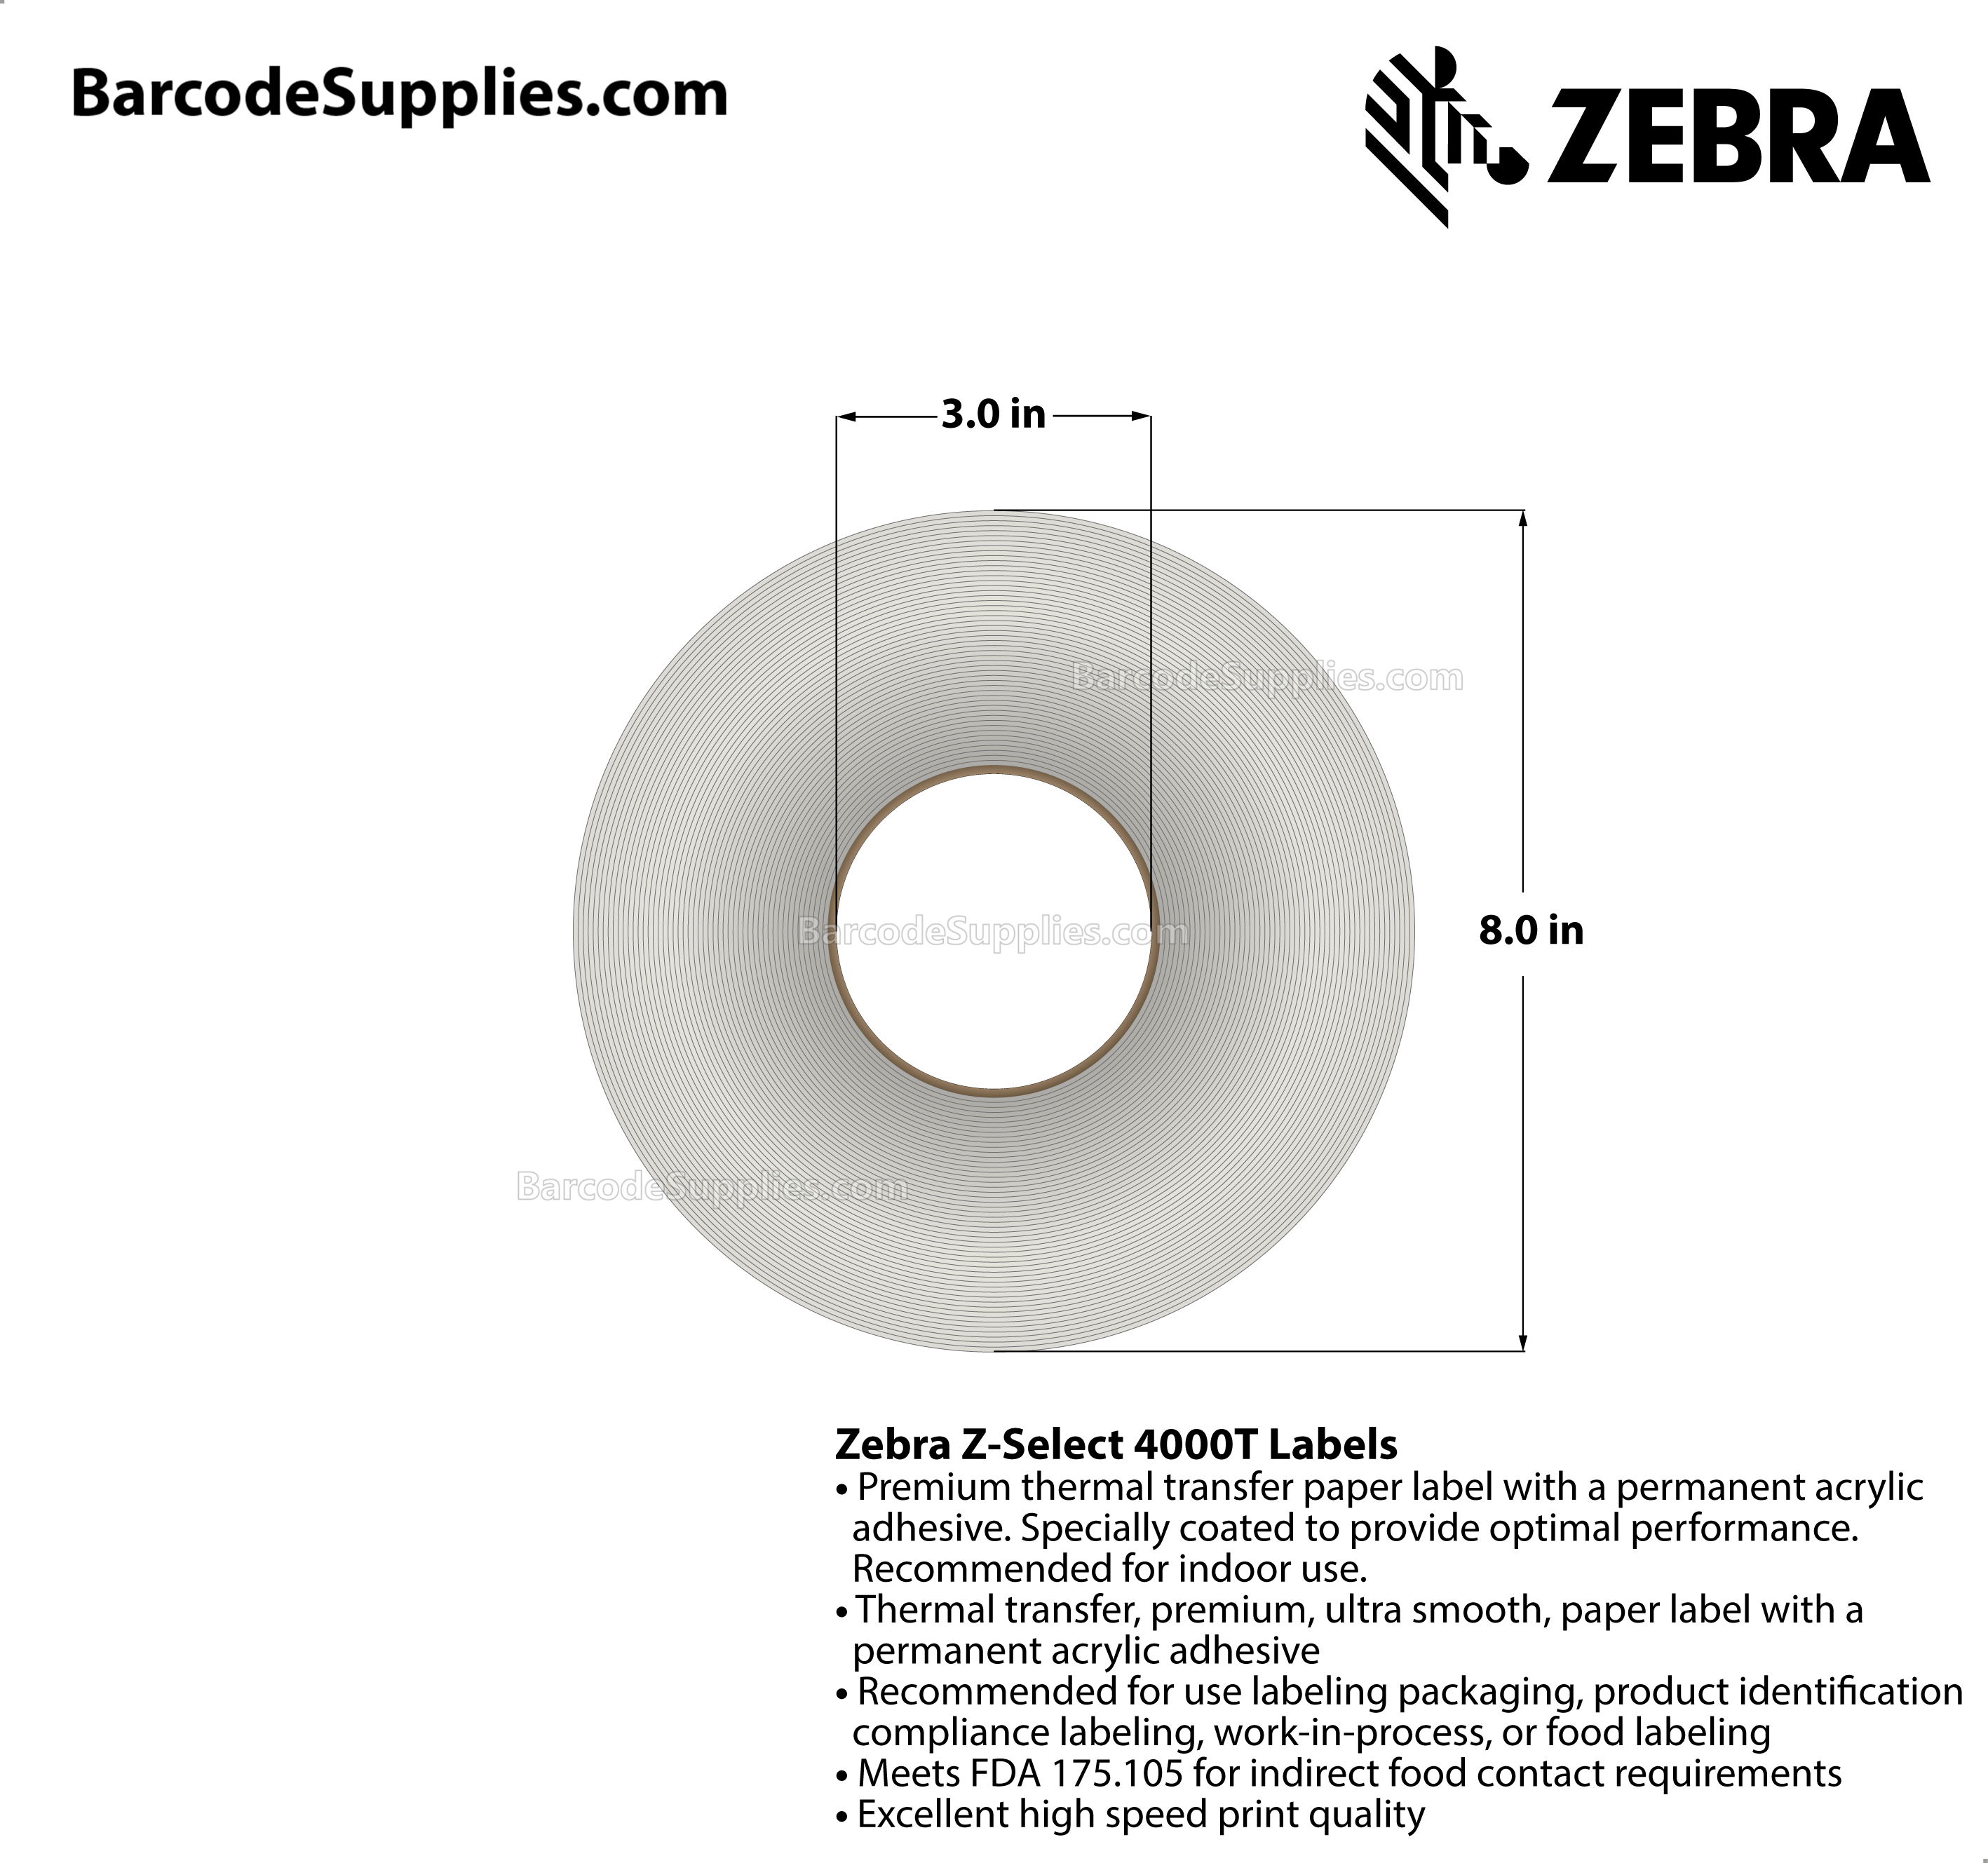 4 x 5 Thermal Transfer White Z-Select 4000T Labels With Permanent Adhesive - Perforated - 1365 Labels Per Roll - Carton Of 4 Rolls - 5460 Labels Total - MPN: 800640-505